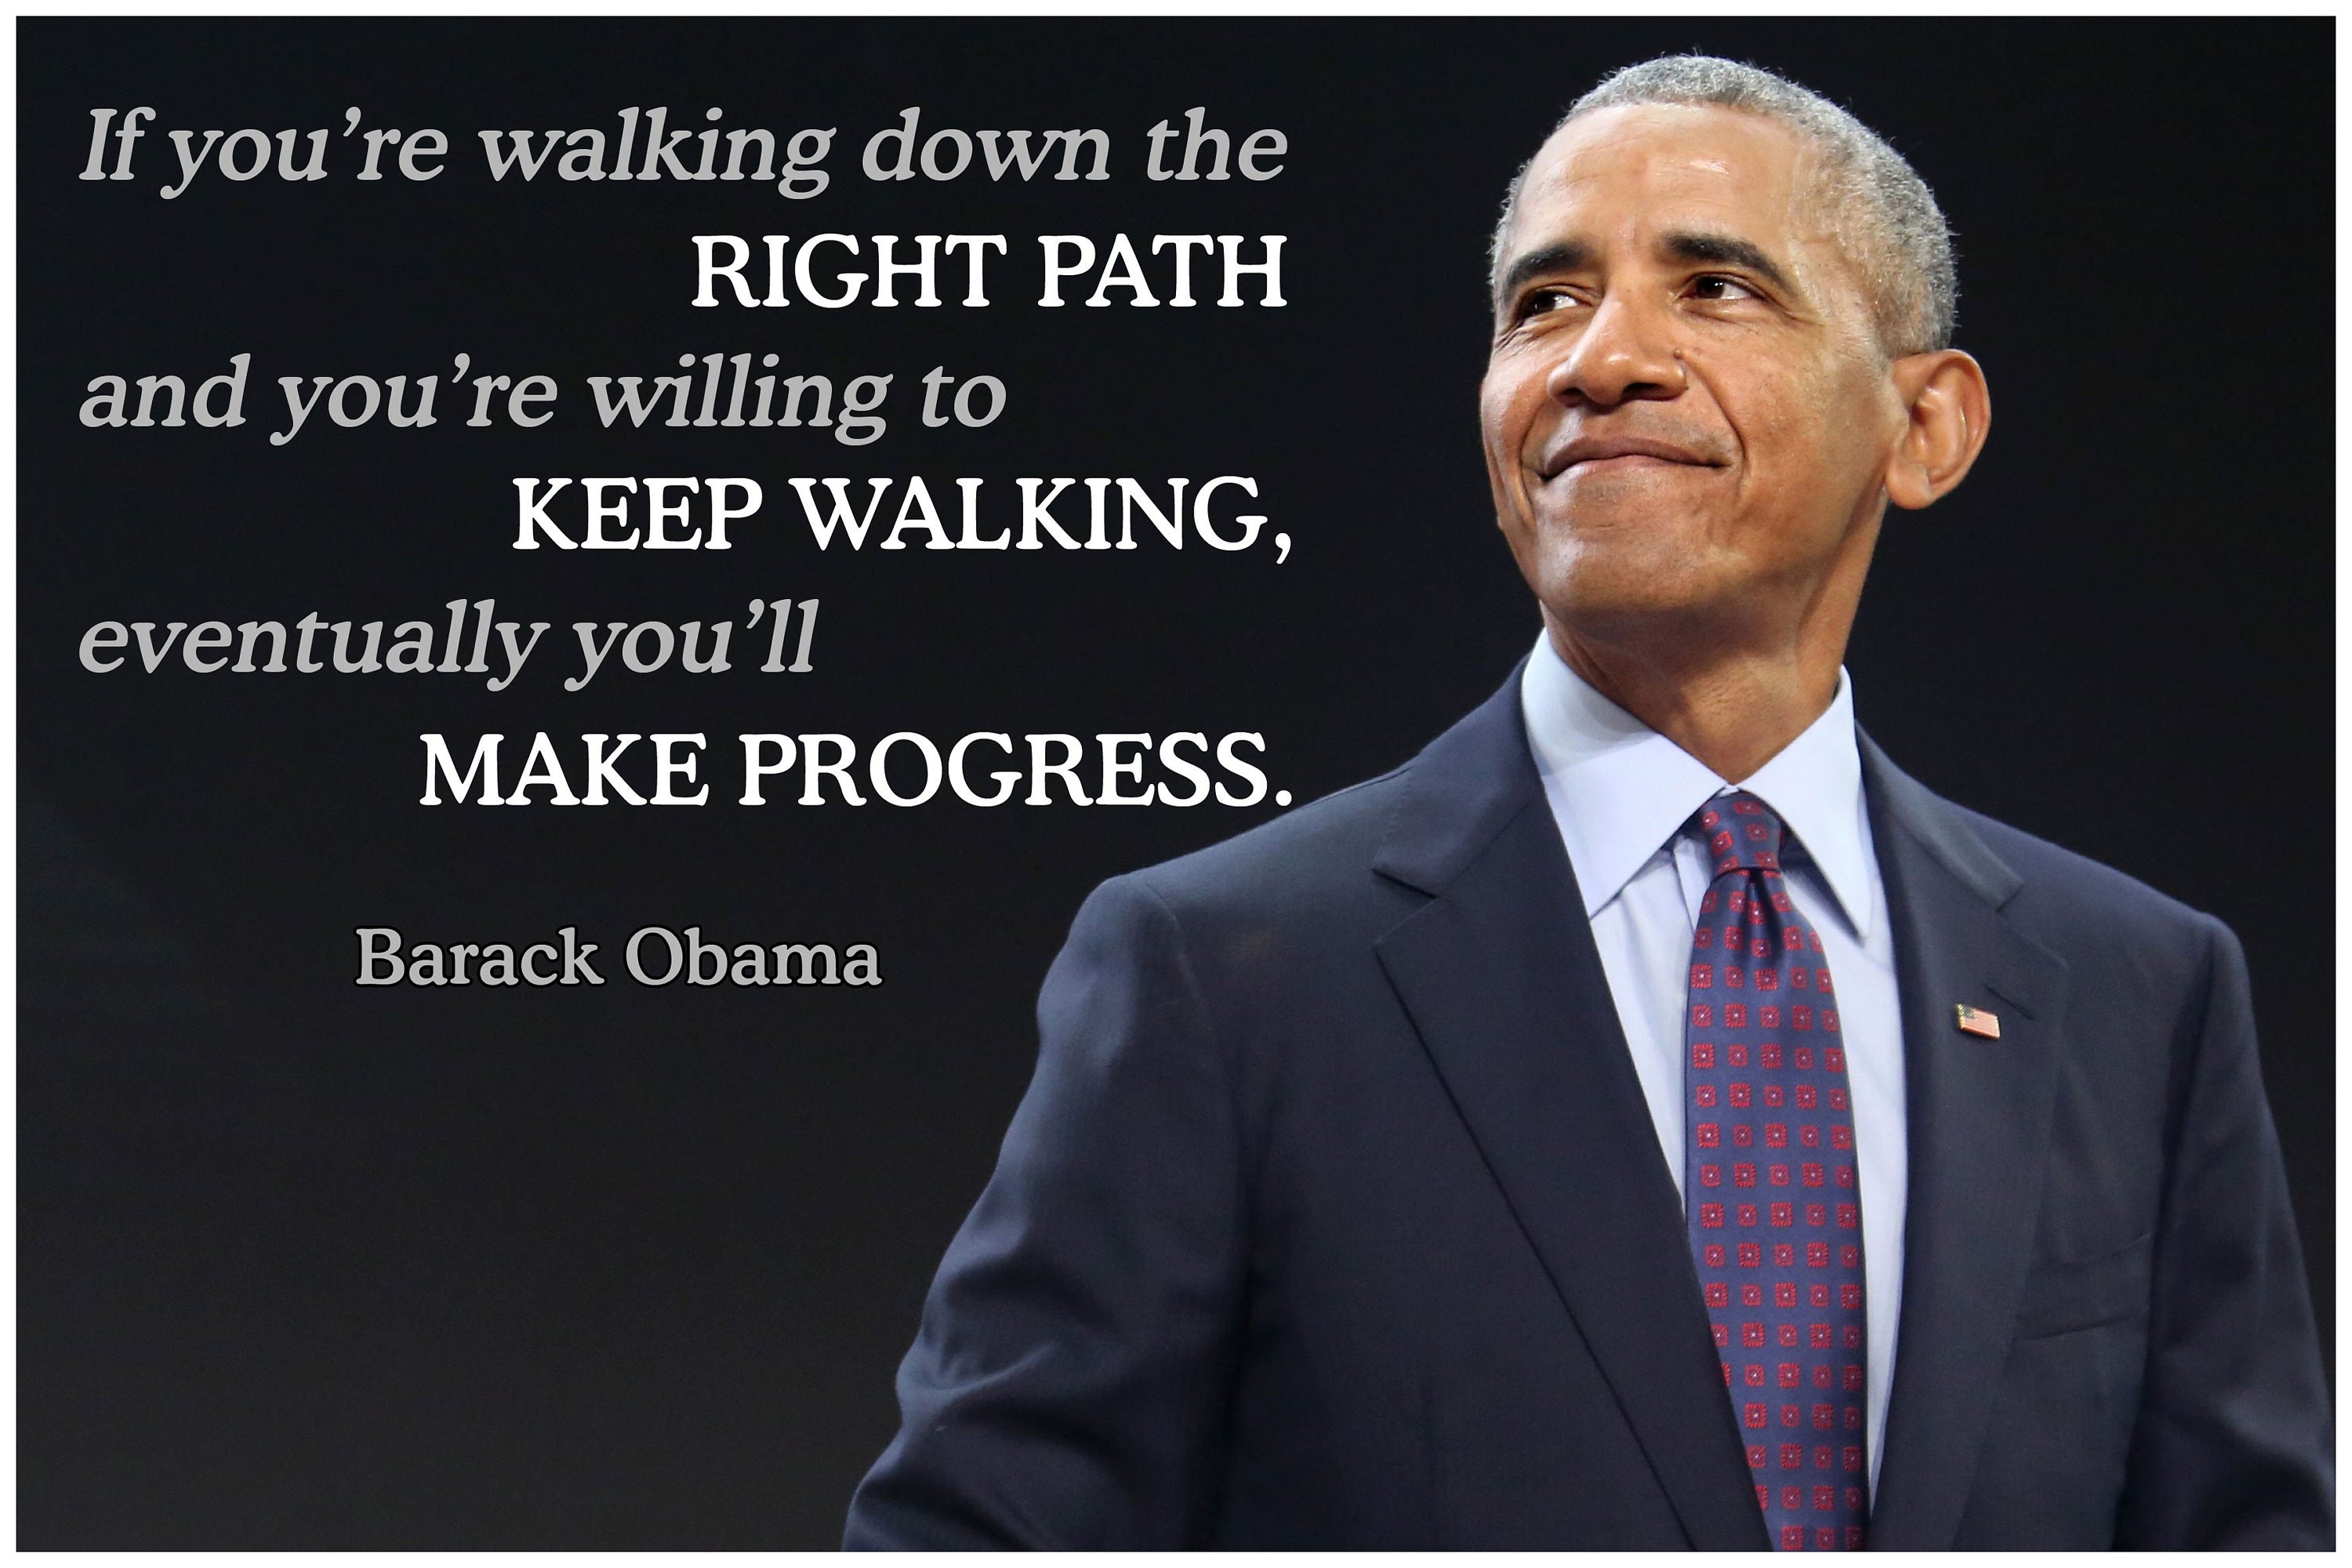 Barack Obama Quote Classroom Poster Growth Mindset Posters School